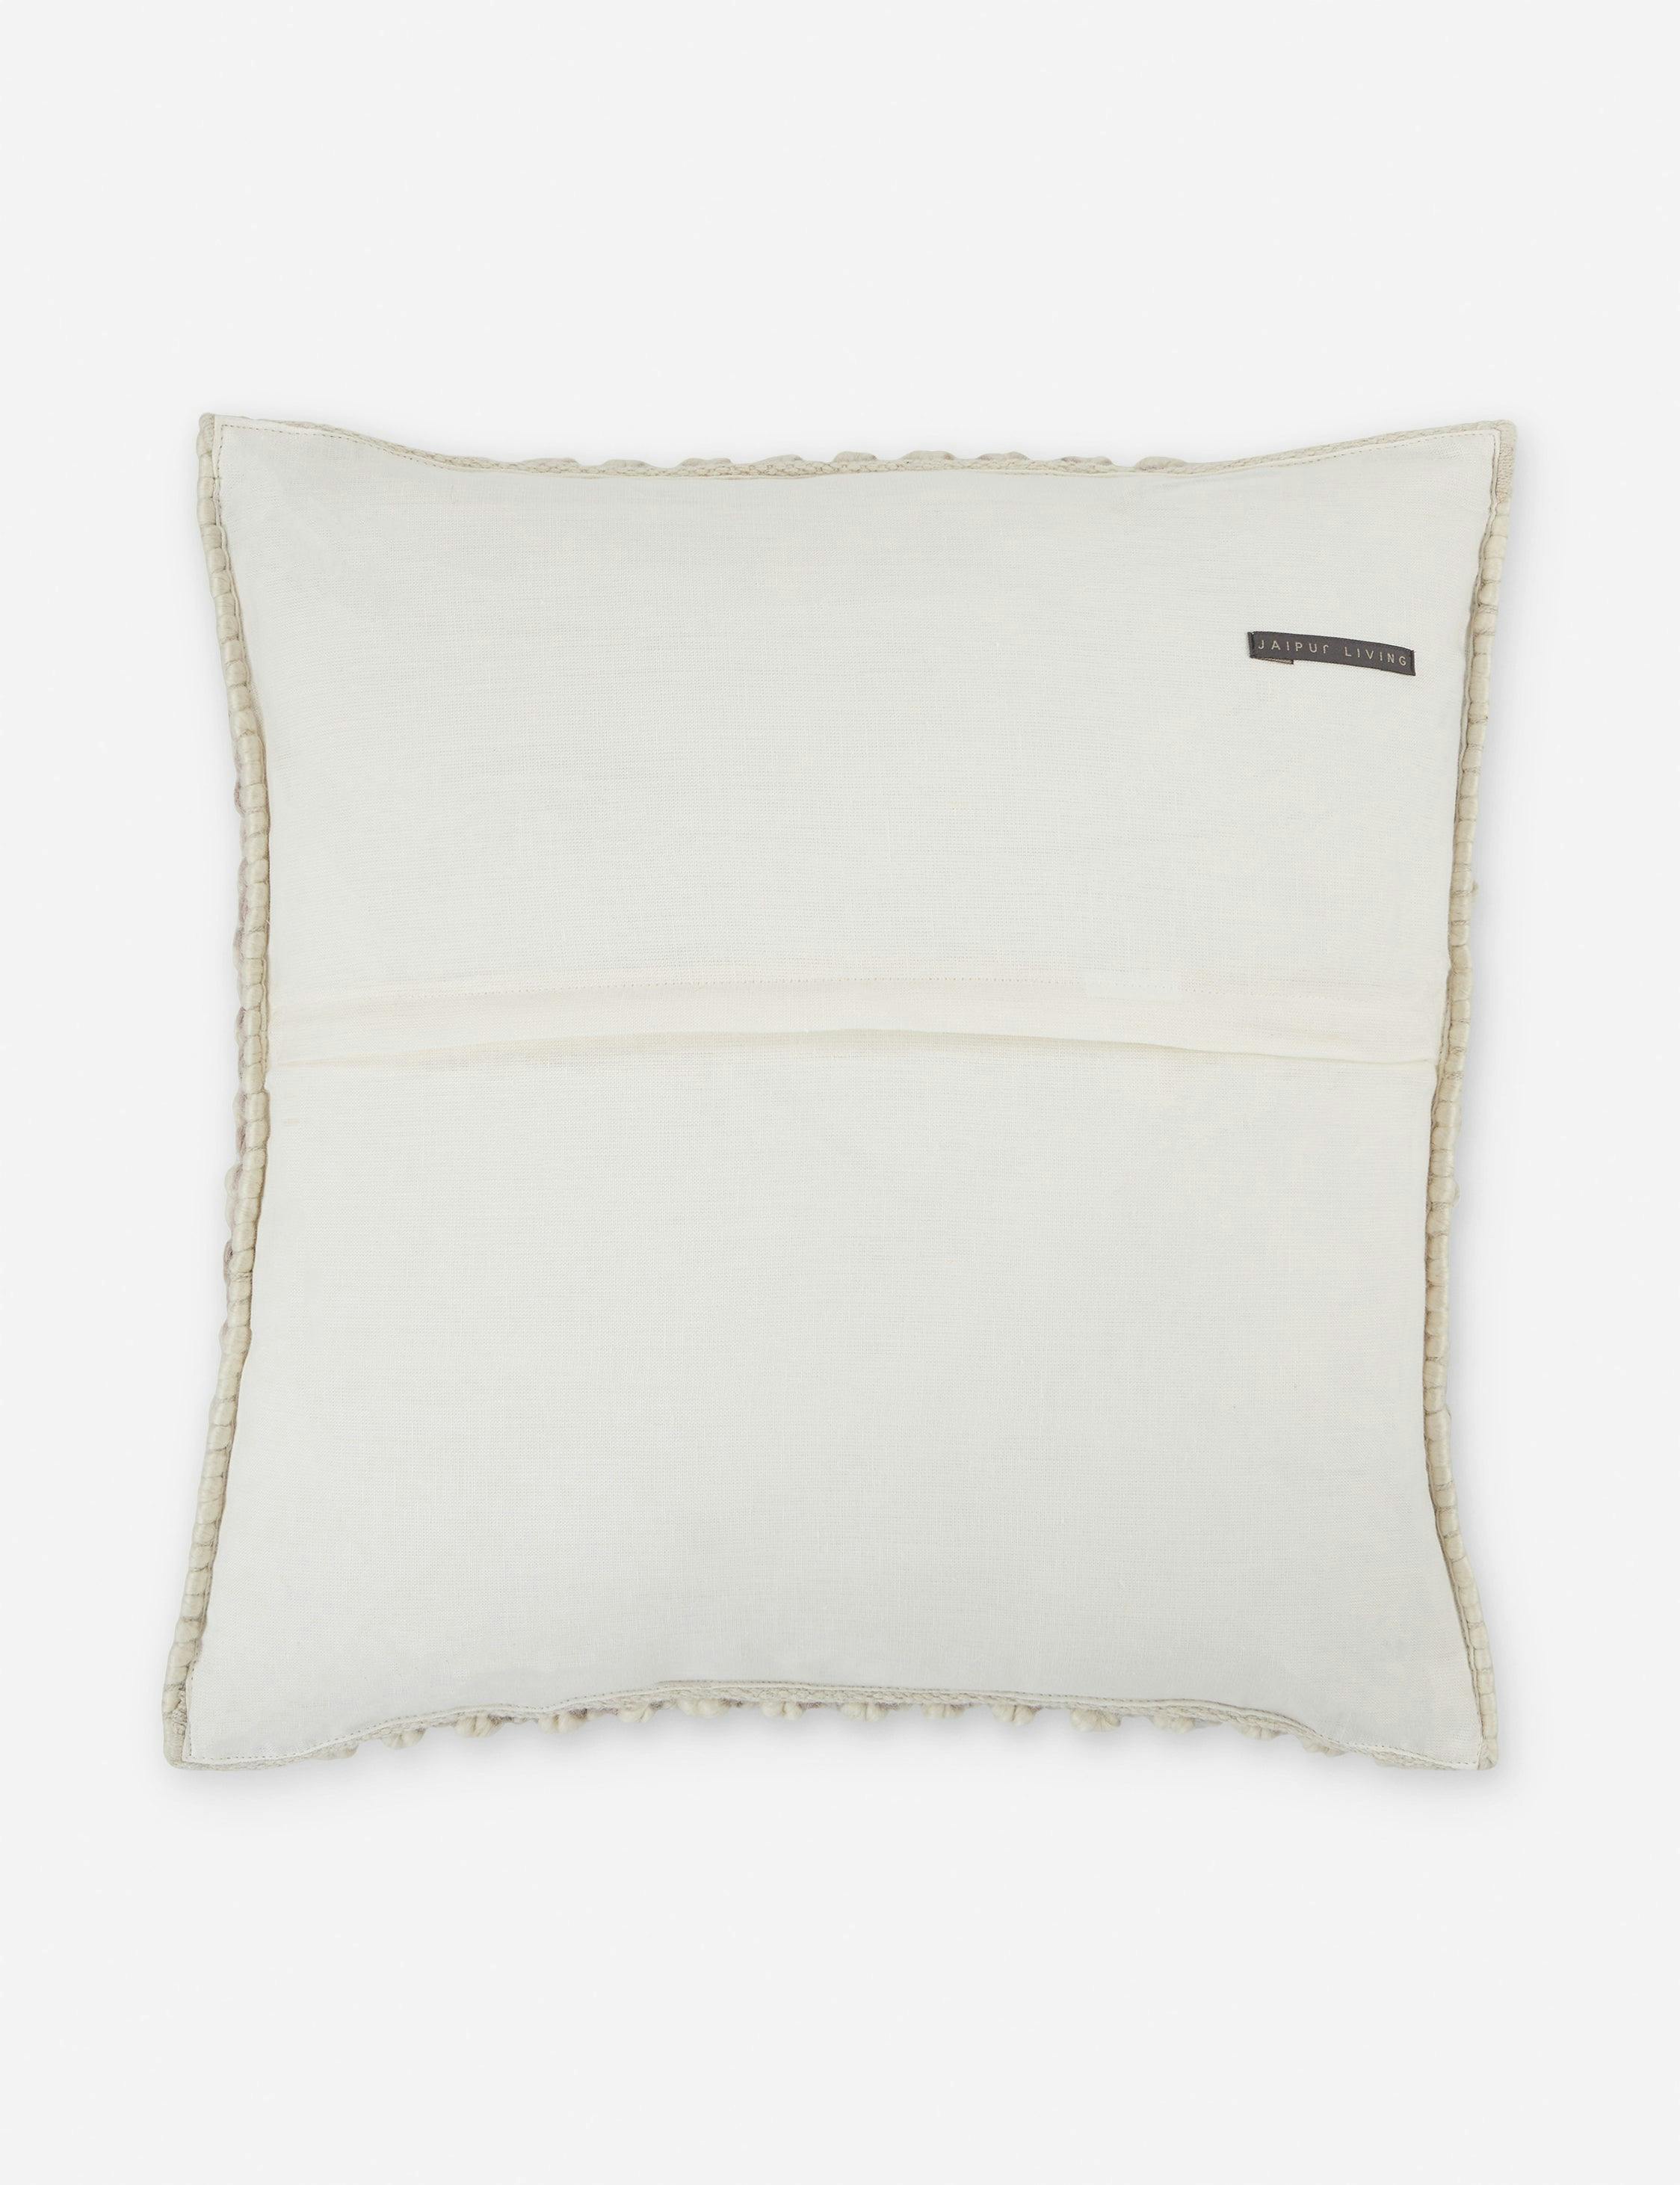 Luan Pillow - Taupe and Ivory / Polyester